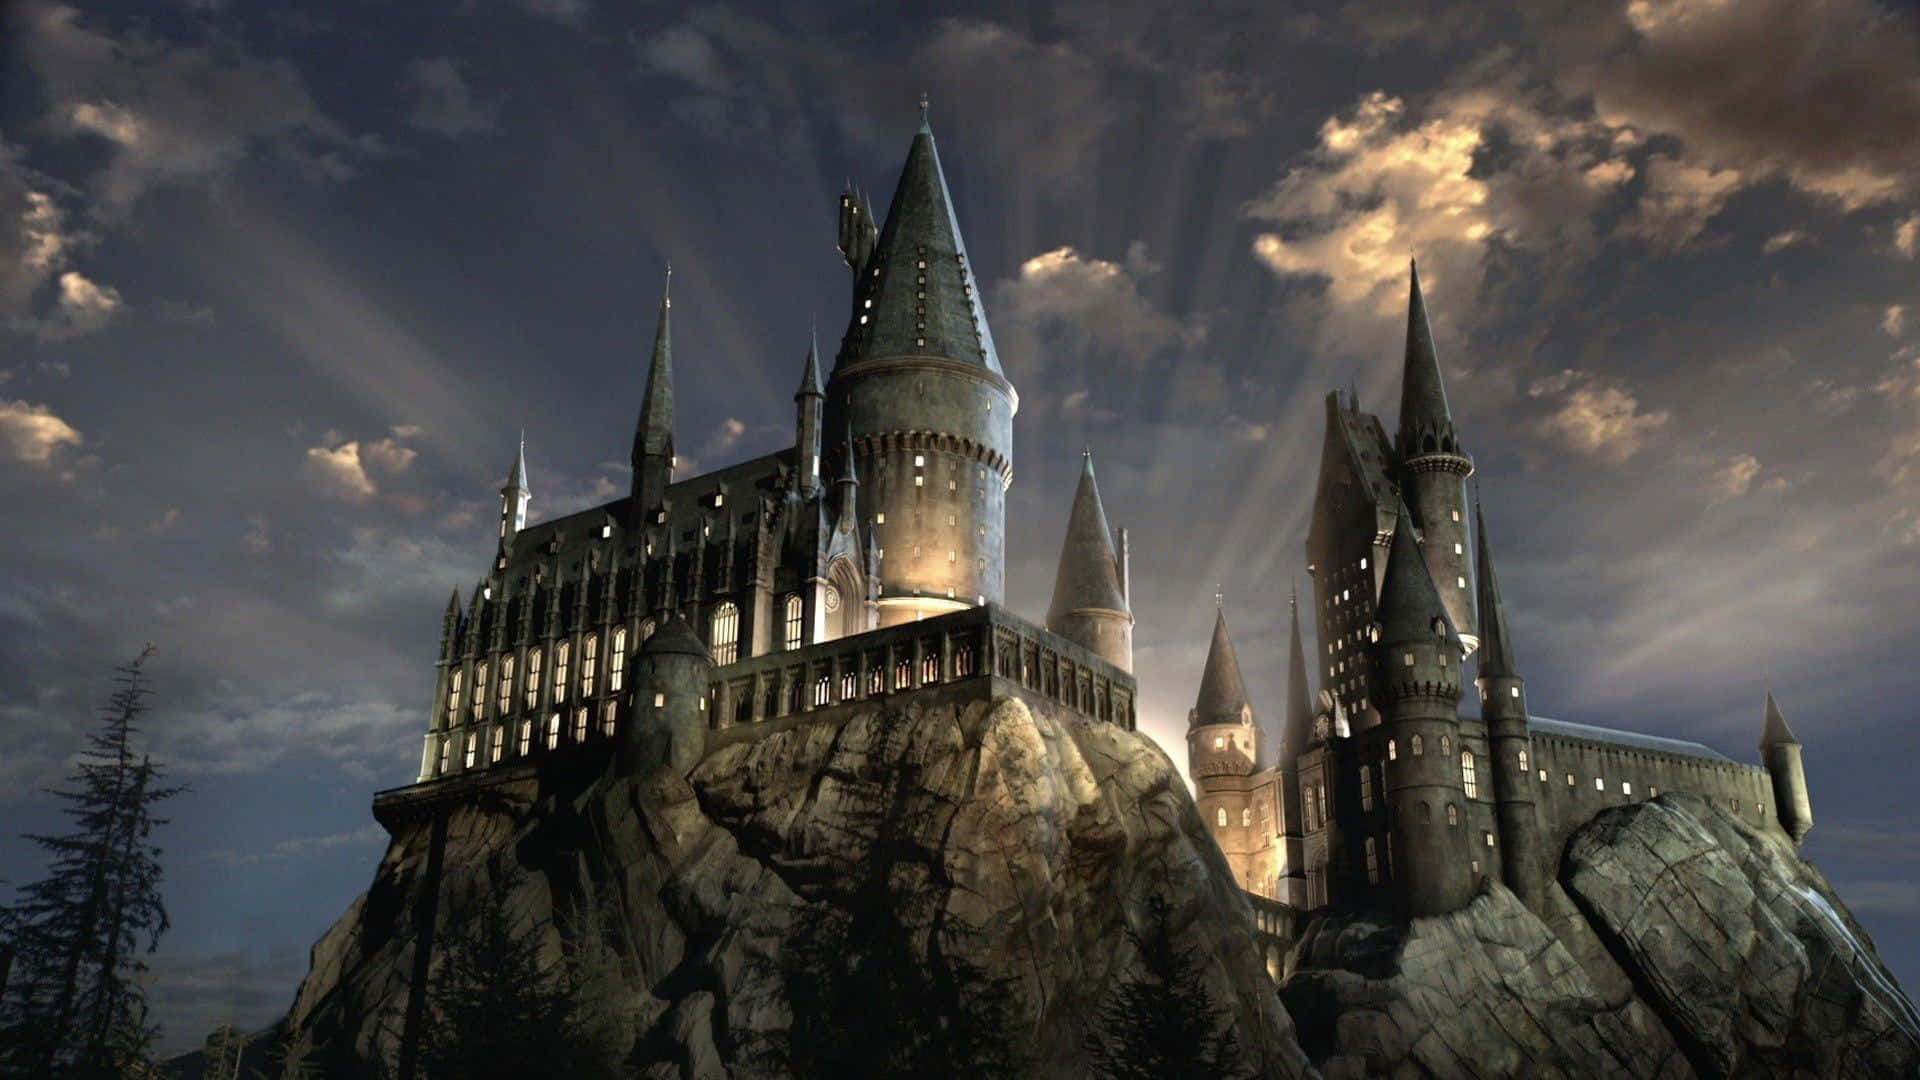 A View of the Magical Hogwarts School